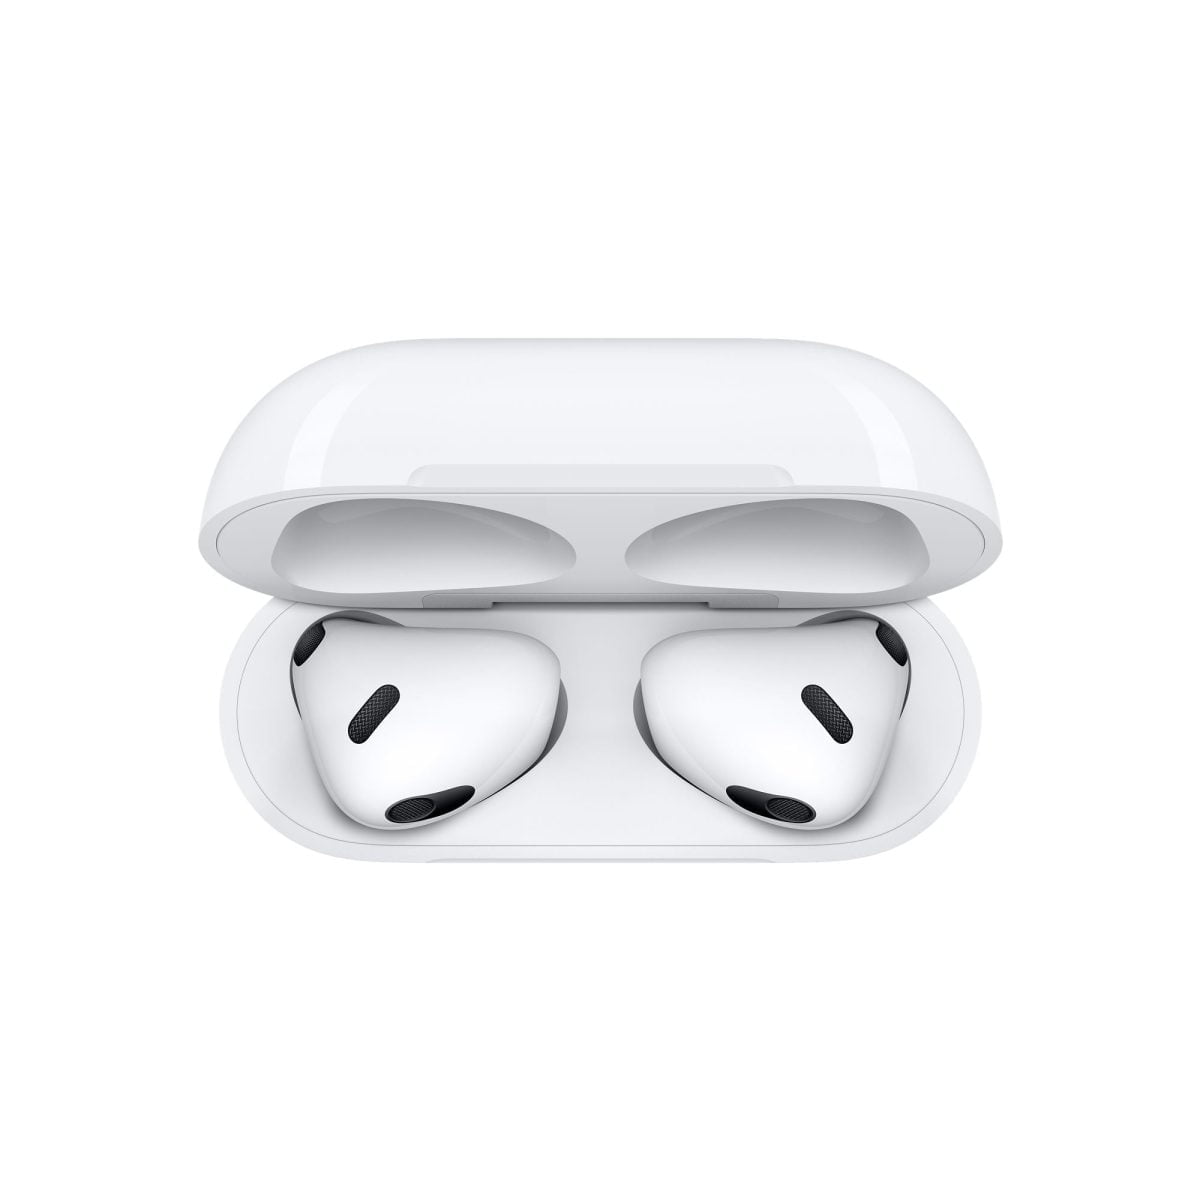 Mme73 Av3 Apple &Lt;H1&Gt;Apple Airpods (3Rd Generation) - White&Lt;/H1&Gt; &Lt;Div Class=&Quot;Rc-Pdsection-Mainpanel Column Large-9 Small-12&Quot;&Gt; &Lt;H2 Class=&Quot;H4-Para-Title&Quot;&Gt;All-New Design&Lt;/H2&Gt; &Lt;Div Class=&Quot;Para-List As-Pdp-Lastparalist&Quot;&Gt; Airpods Are Lightweight And Offer A Contoured Design. They Sit At Just The Right Angle For Comfort And To Better Direct Audio To Your Ear. The Stem Is 33 Percent Shorter Than Airpods (2Nd Generation) And Includes A Force Sensor To Easily Control Music And Calls. &Lt;/Div&Gt; &Lt;/Div&Gt; Apple Airpods Apple Airpods (3Rd Generation) - White (Mme73)